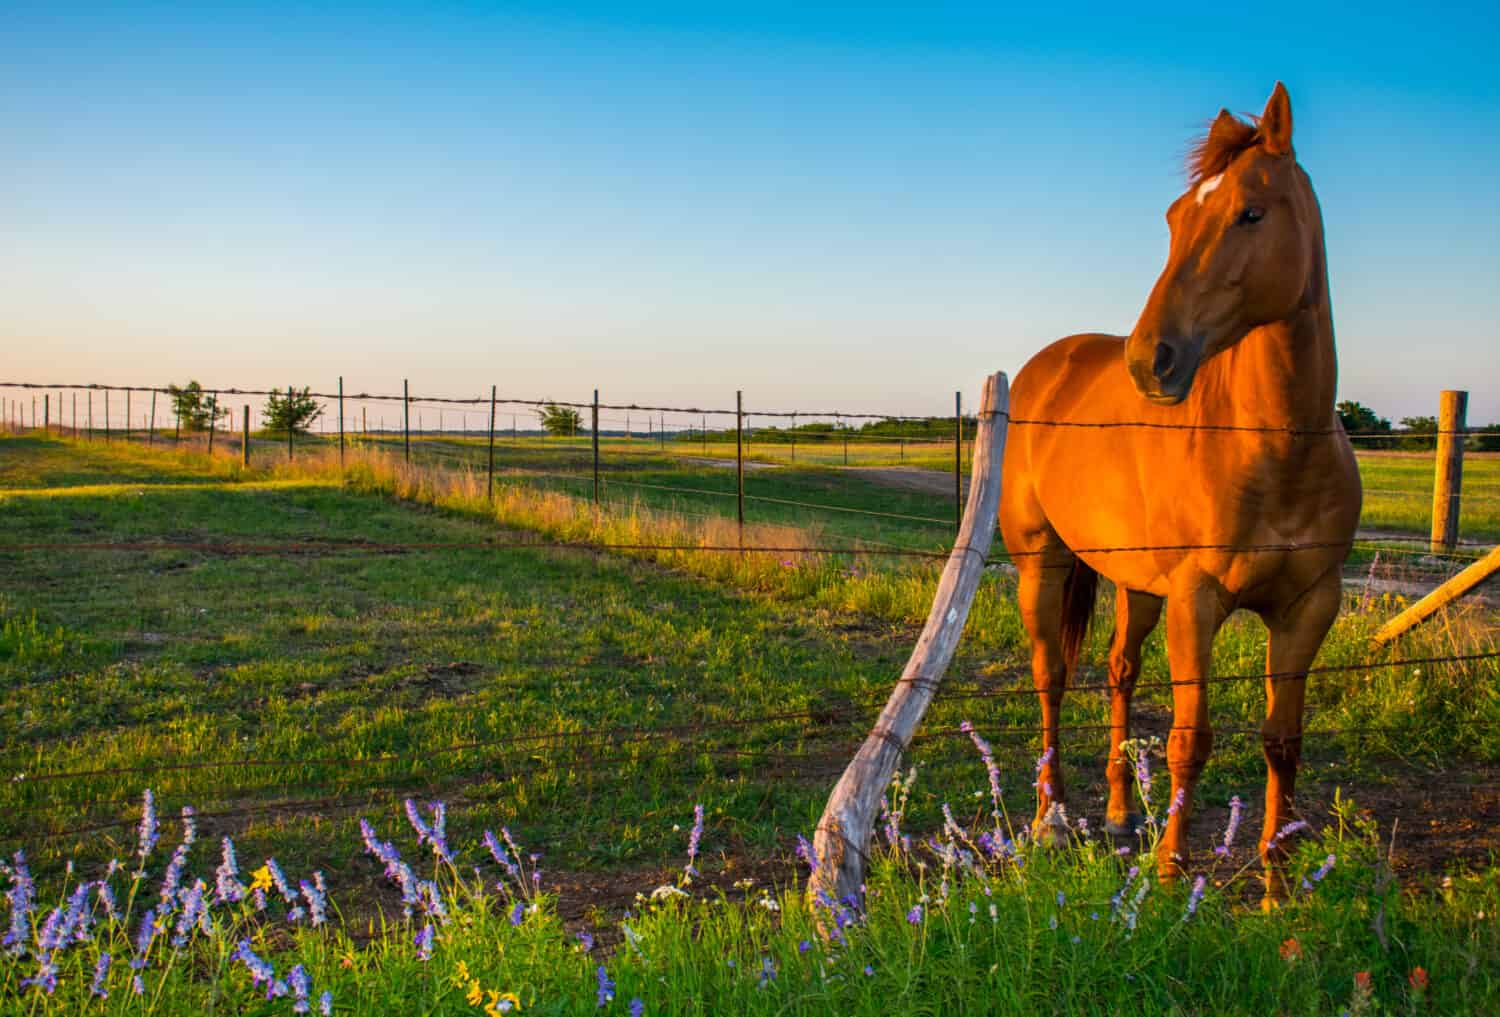 Sunset as Sunny the horse poses for her photo shoot on the Texas hill country prairie with blue flowers and golden shimmer off her coat